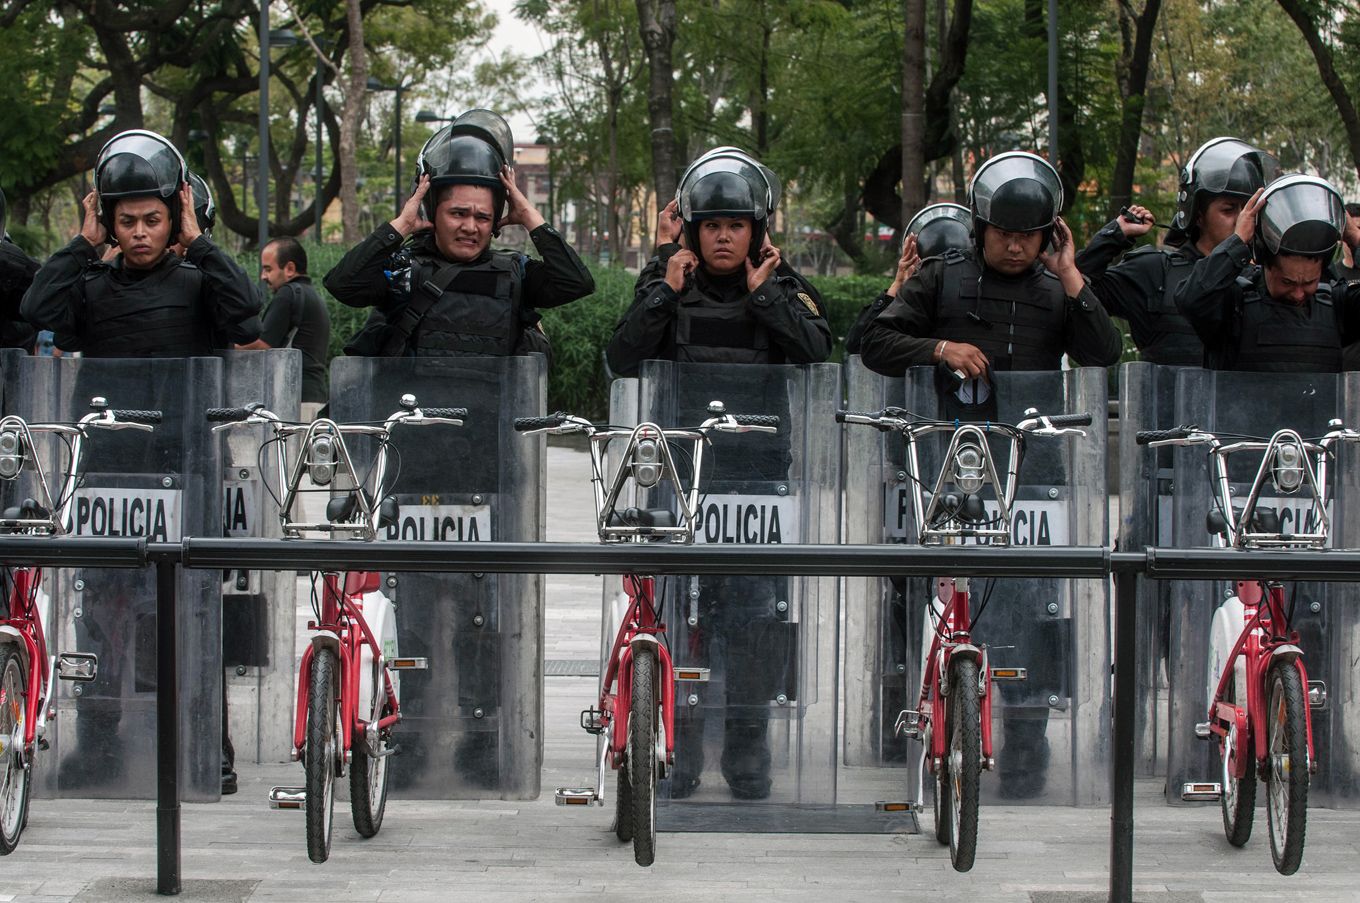 Riot police assemble behind a bikeshare station, in 2013, preparing to confront a march organized by teachers unions opposed to Peña Nieto’s educational reforms. Image by Eneas De Troya. Mexico, 2013.